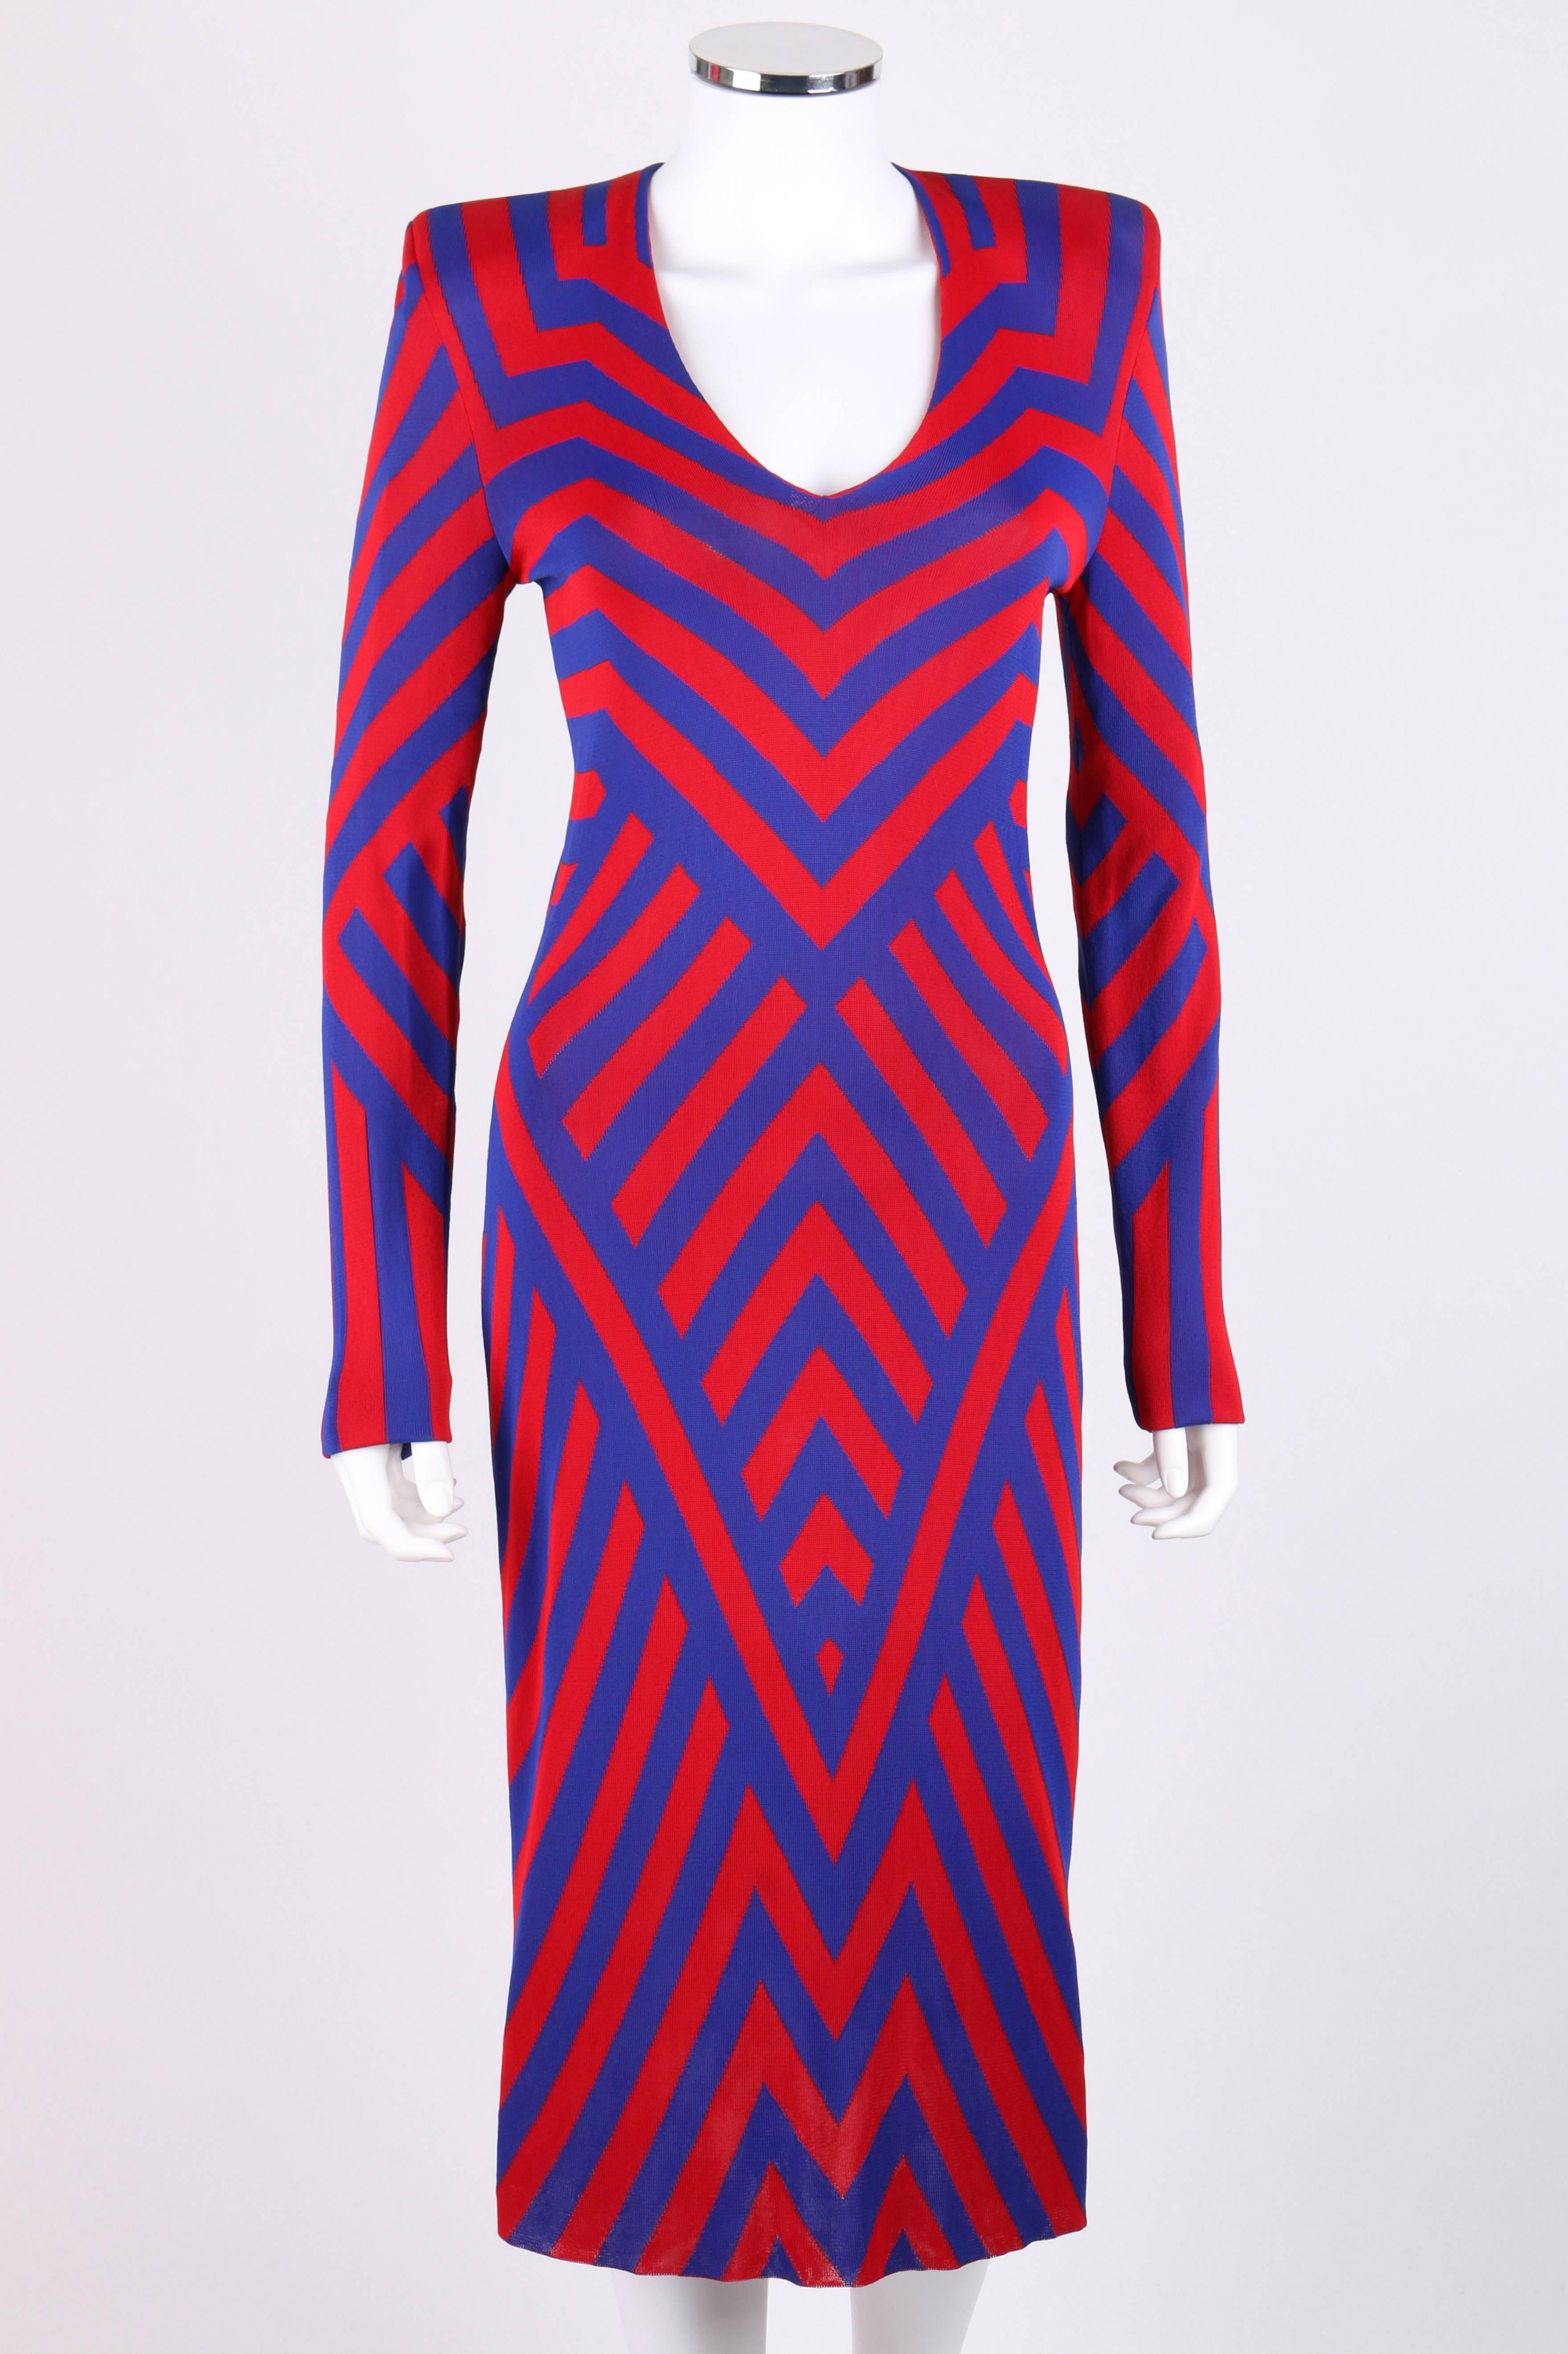 Alexander McQueen Resort 2010 knit sheath dress. Runway look #2. Red and blue chevron op art pattern knit. Long sleeves. U-neckline. Pull over style. Unlined. Shoulder pads. Marked Fabric Content: 